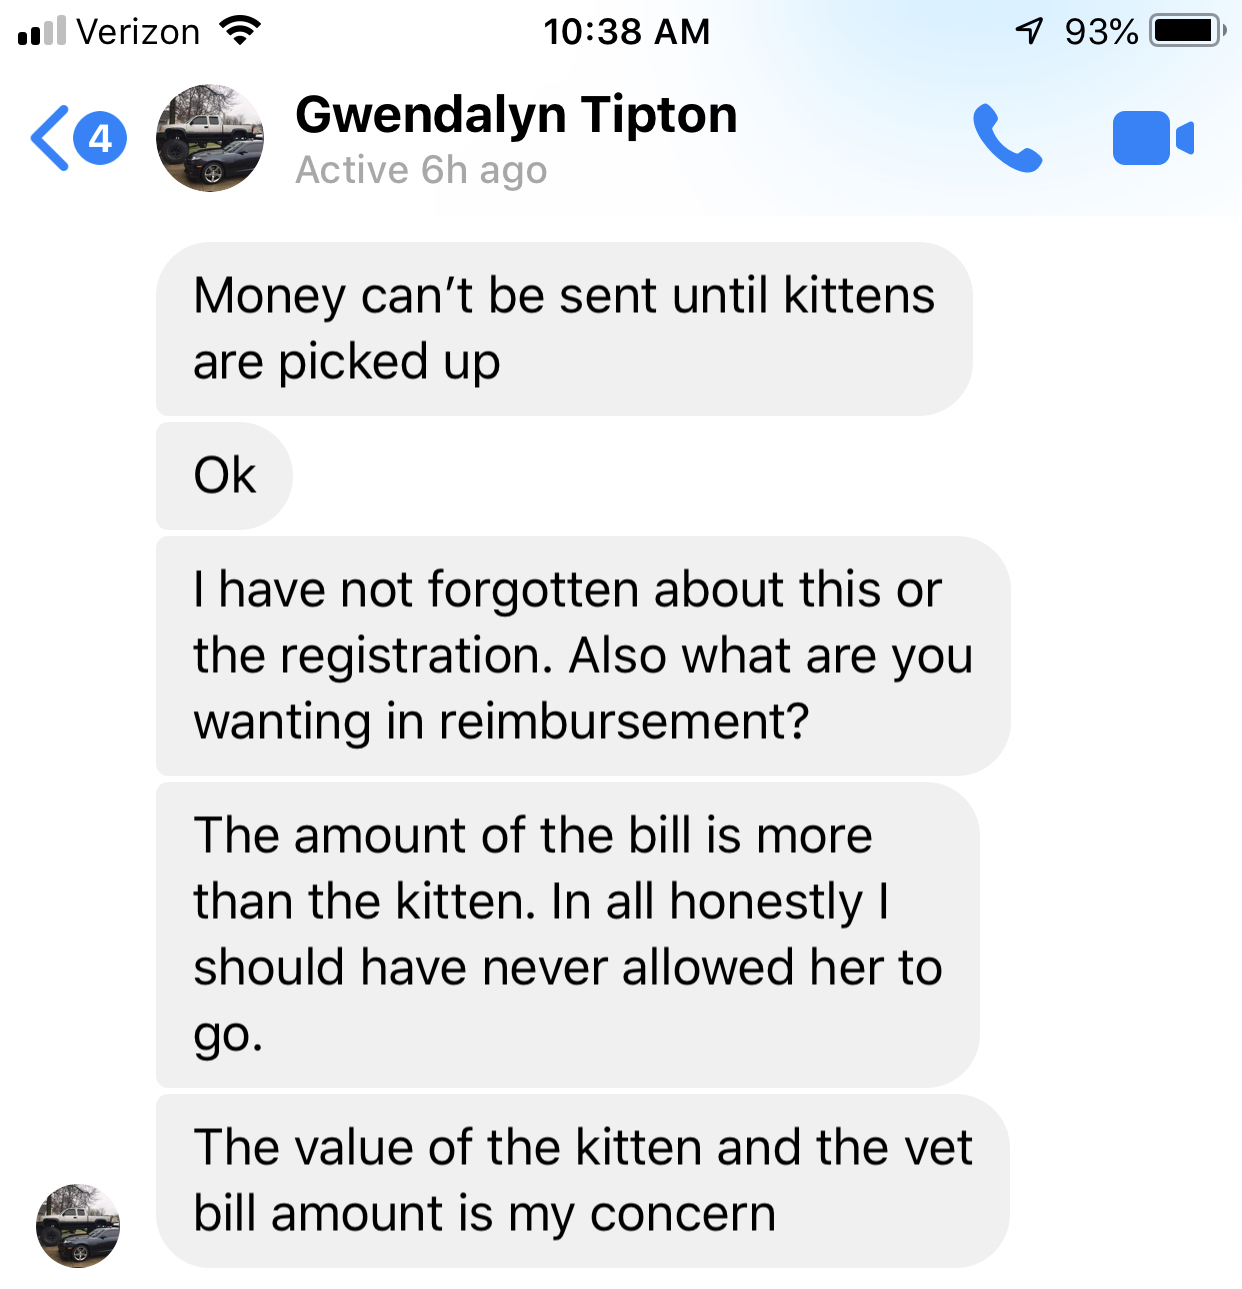 Saying she would pay vet bill